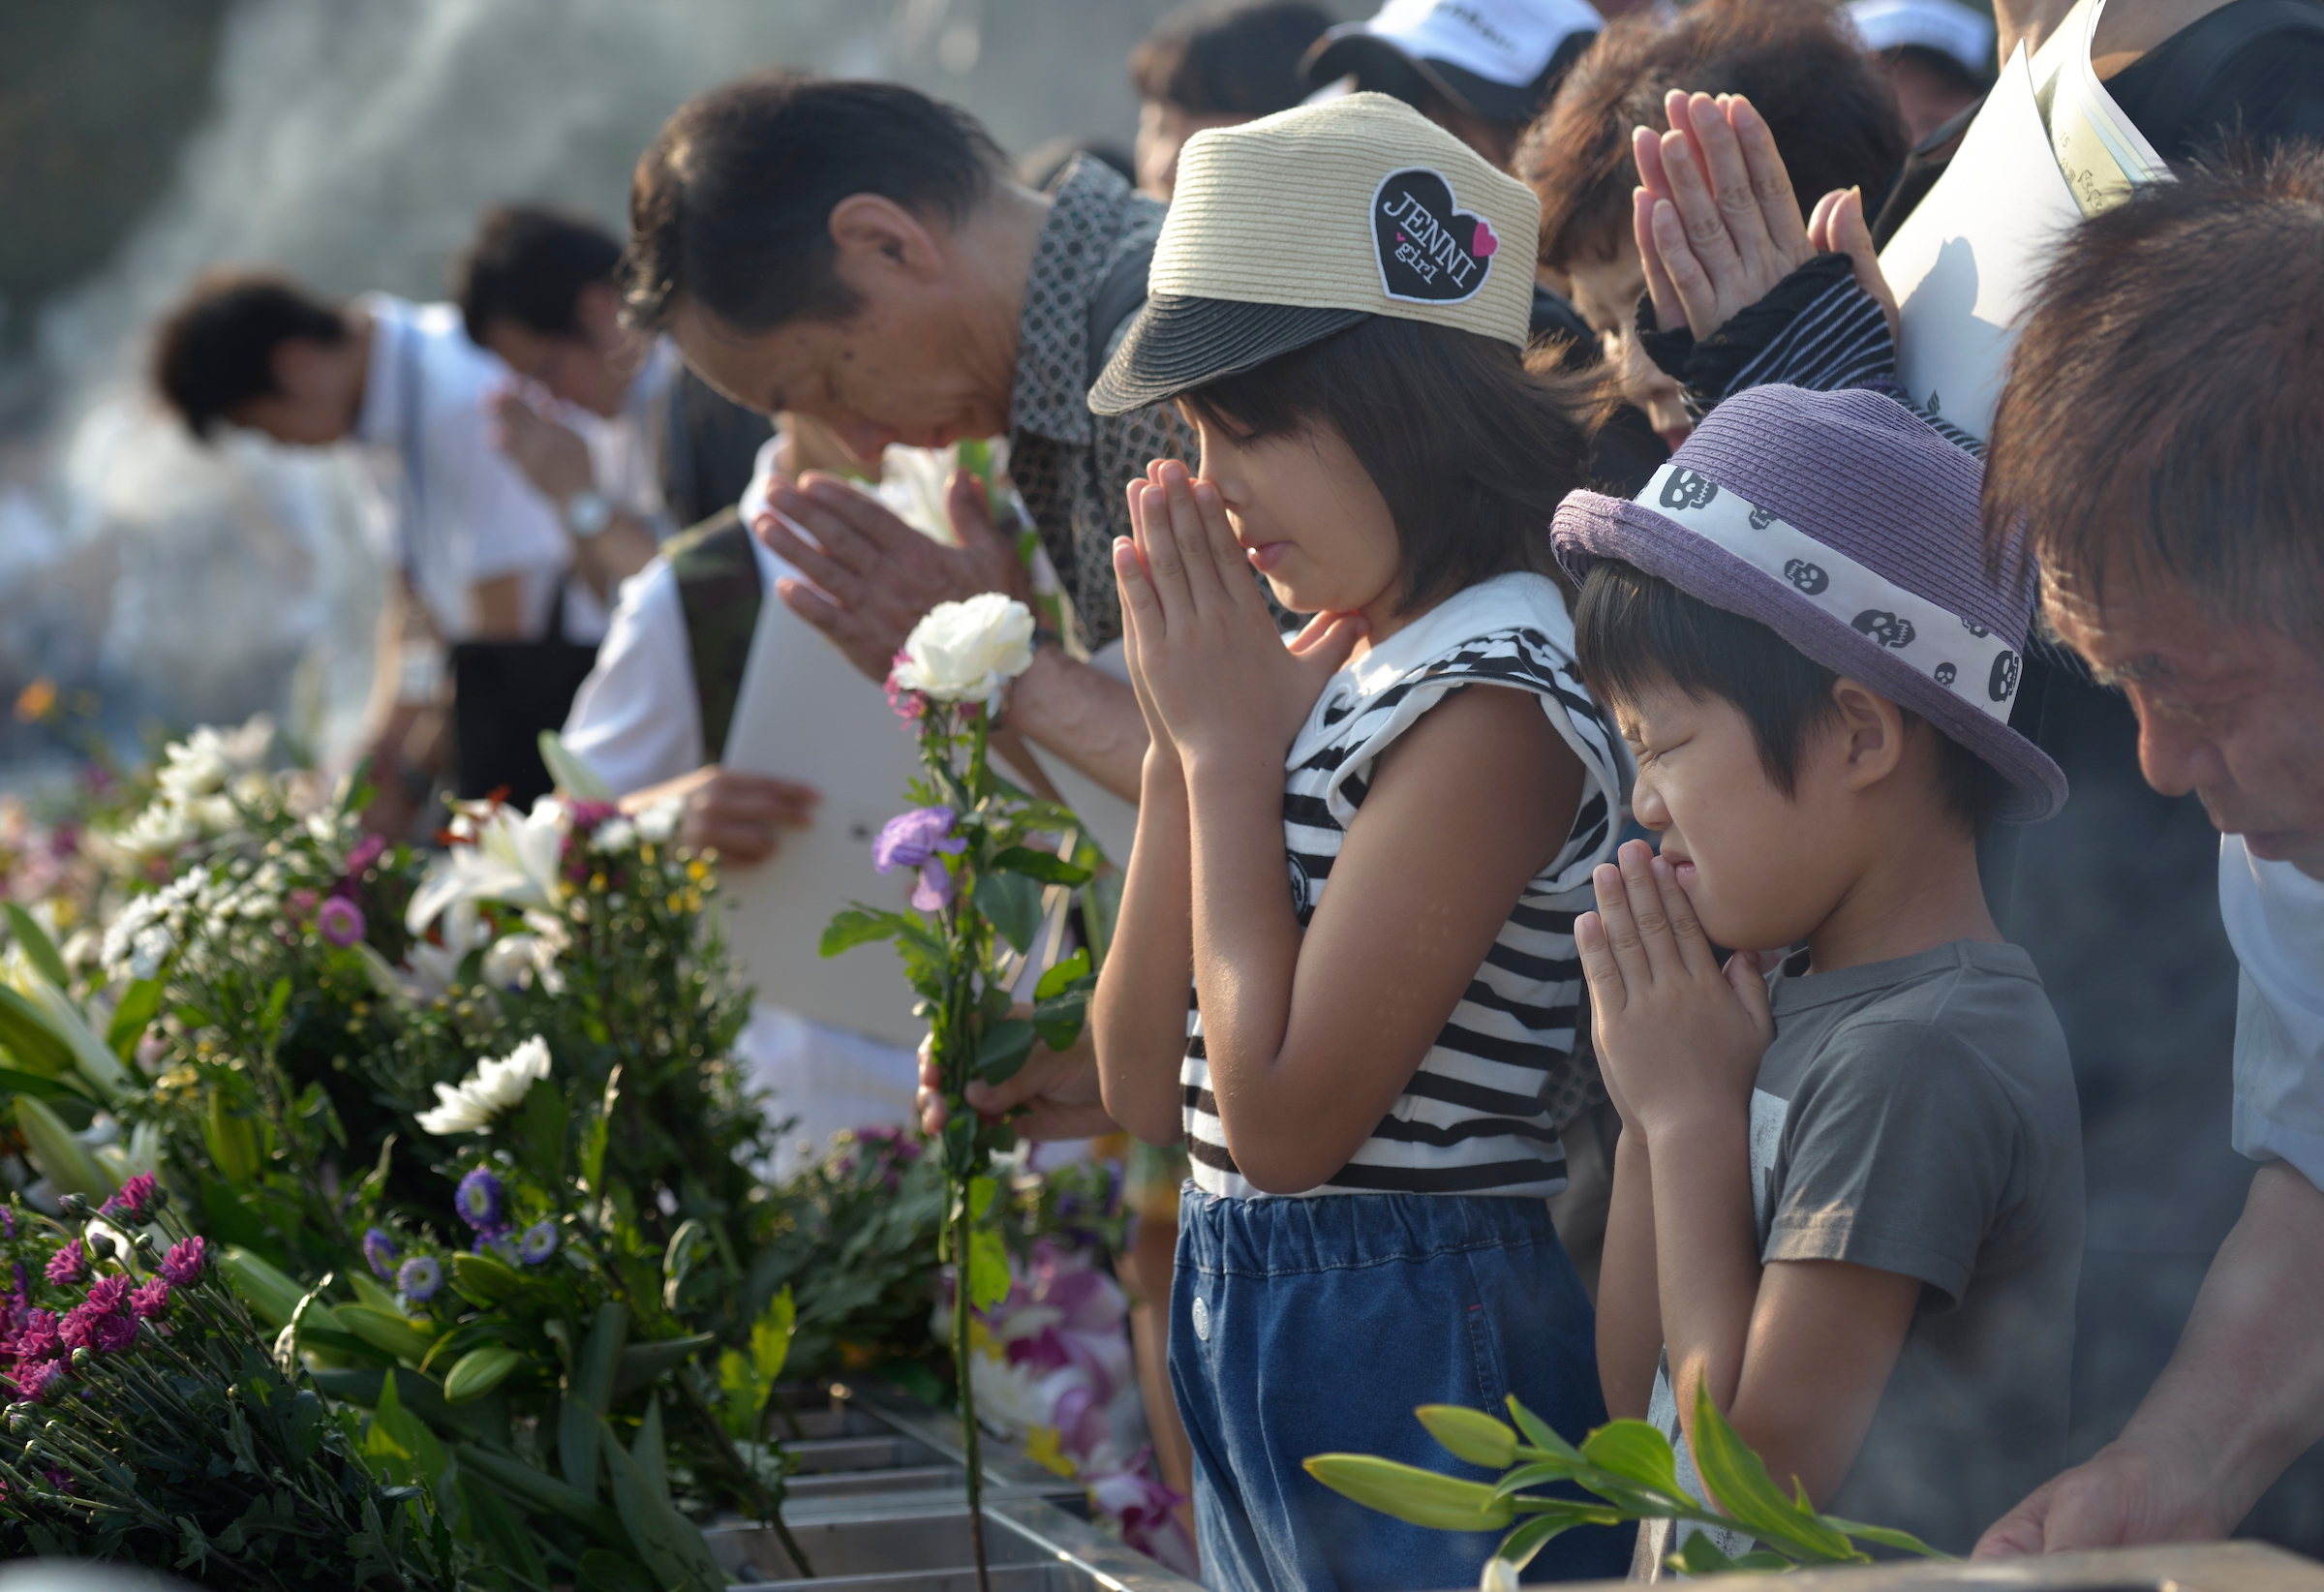 People praying on August 6, 2015, at a memorial in Hiroshima, Japan, that commemorates the victims of the atomic bombing of the city by the United States in 1945. PHOTO: PAUL JEFFREY